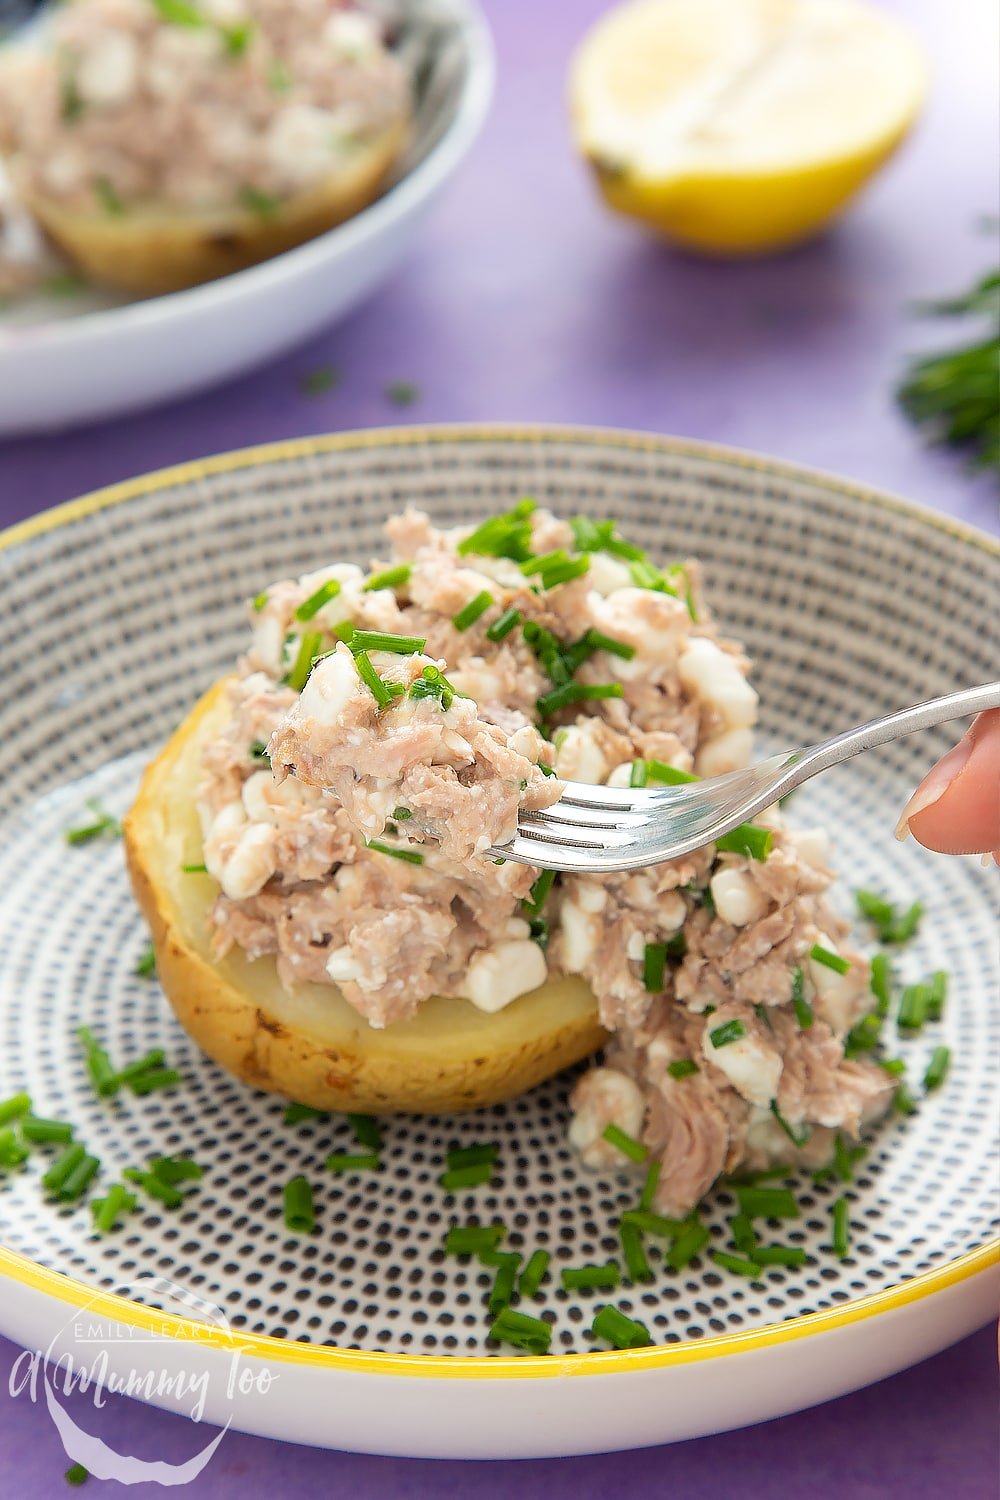 A fork full of the low-fat tuna cheese jacket potato ready to be eaten. 